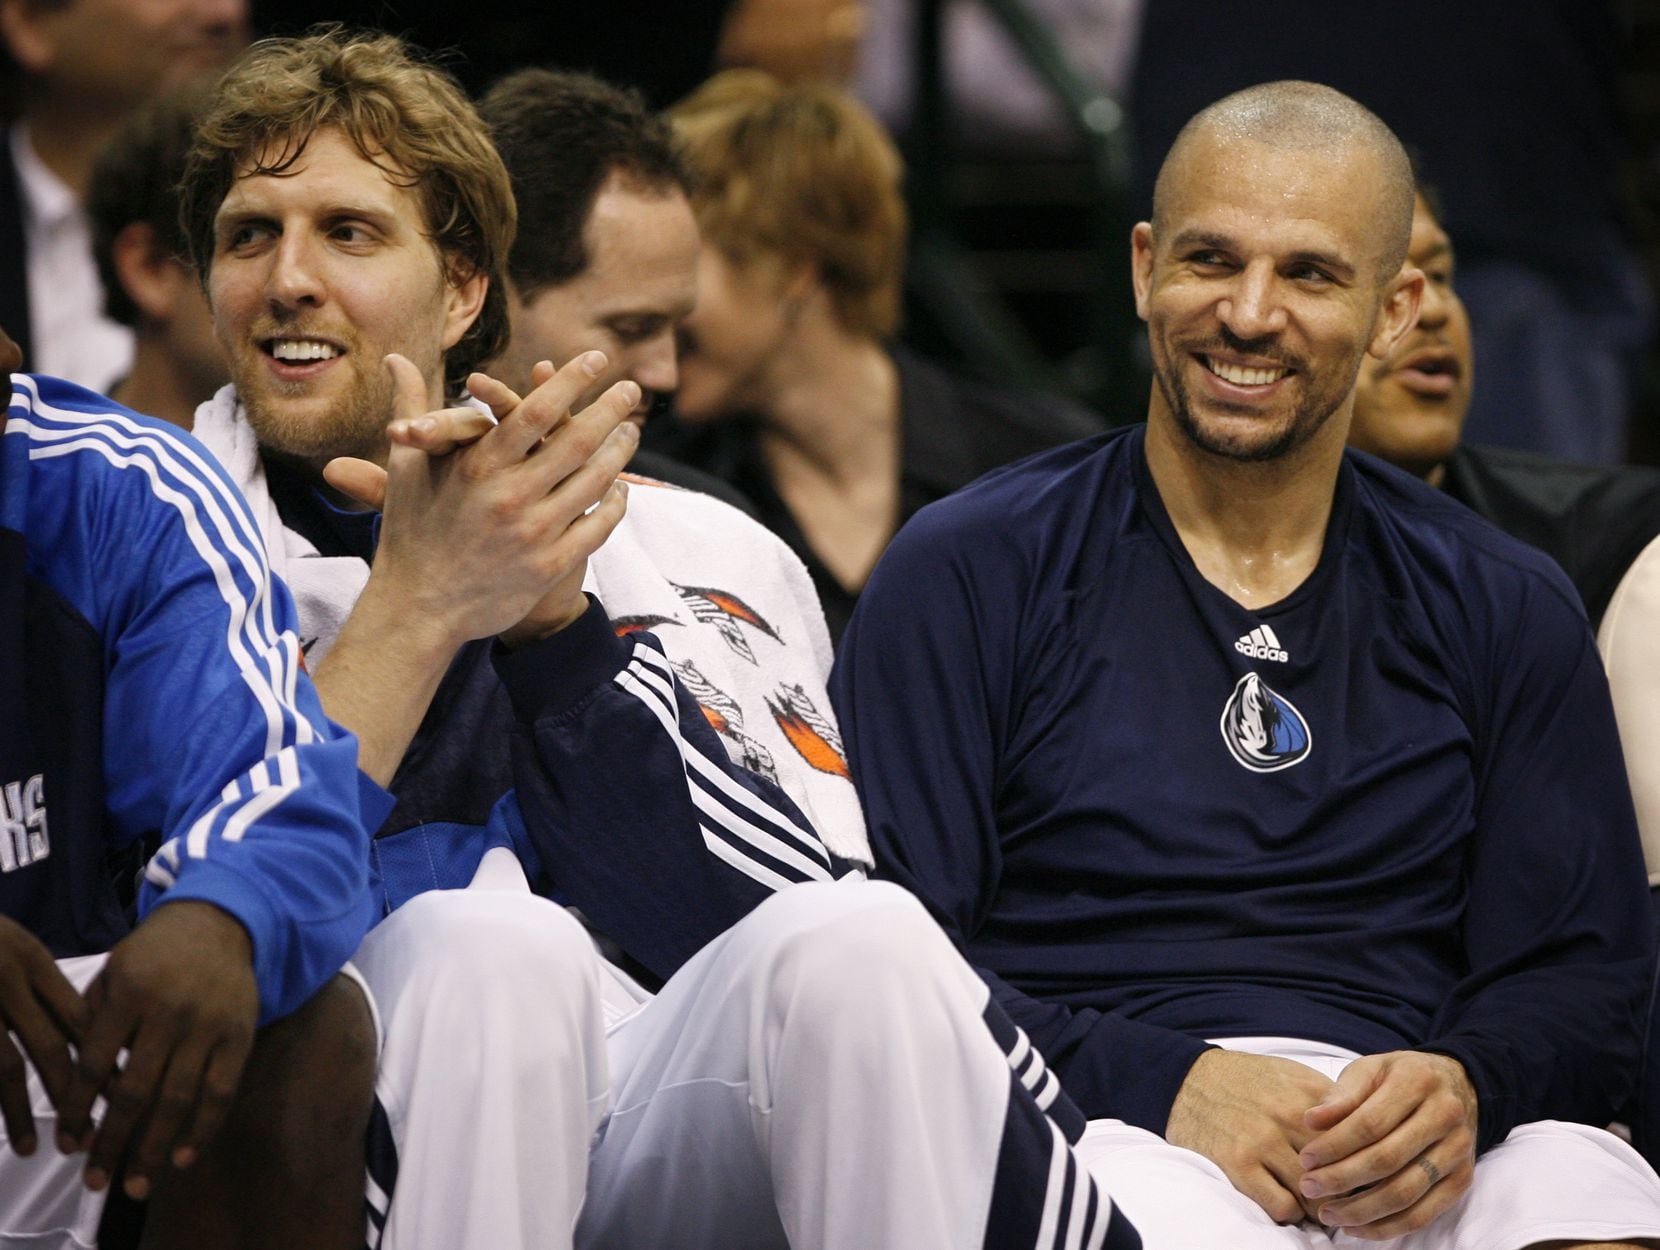 Dallas Mavericks Dirk Nowitzki (left) and Jason Kidd cheer and laugh as they sit on the bench late in the second half of the Mavericks 99-83 win over the SuperSonics on April 8, 2008 at the American Airlines Center in Dallas.